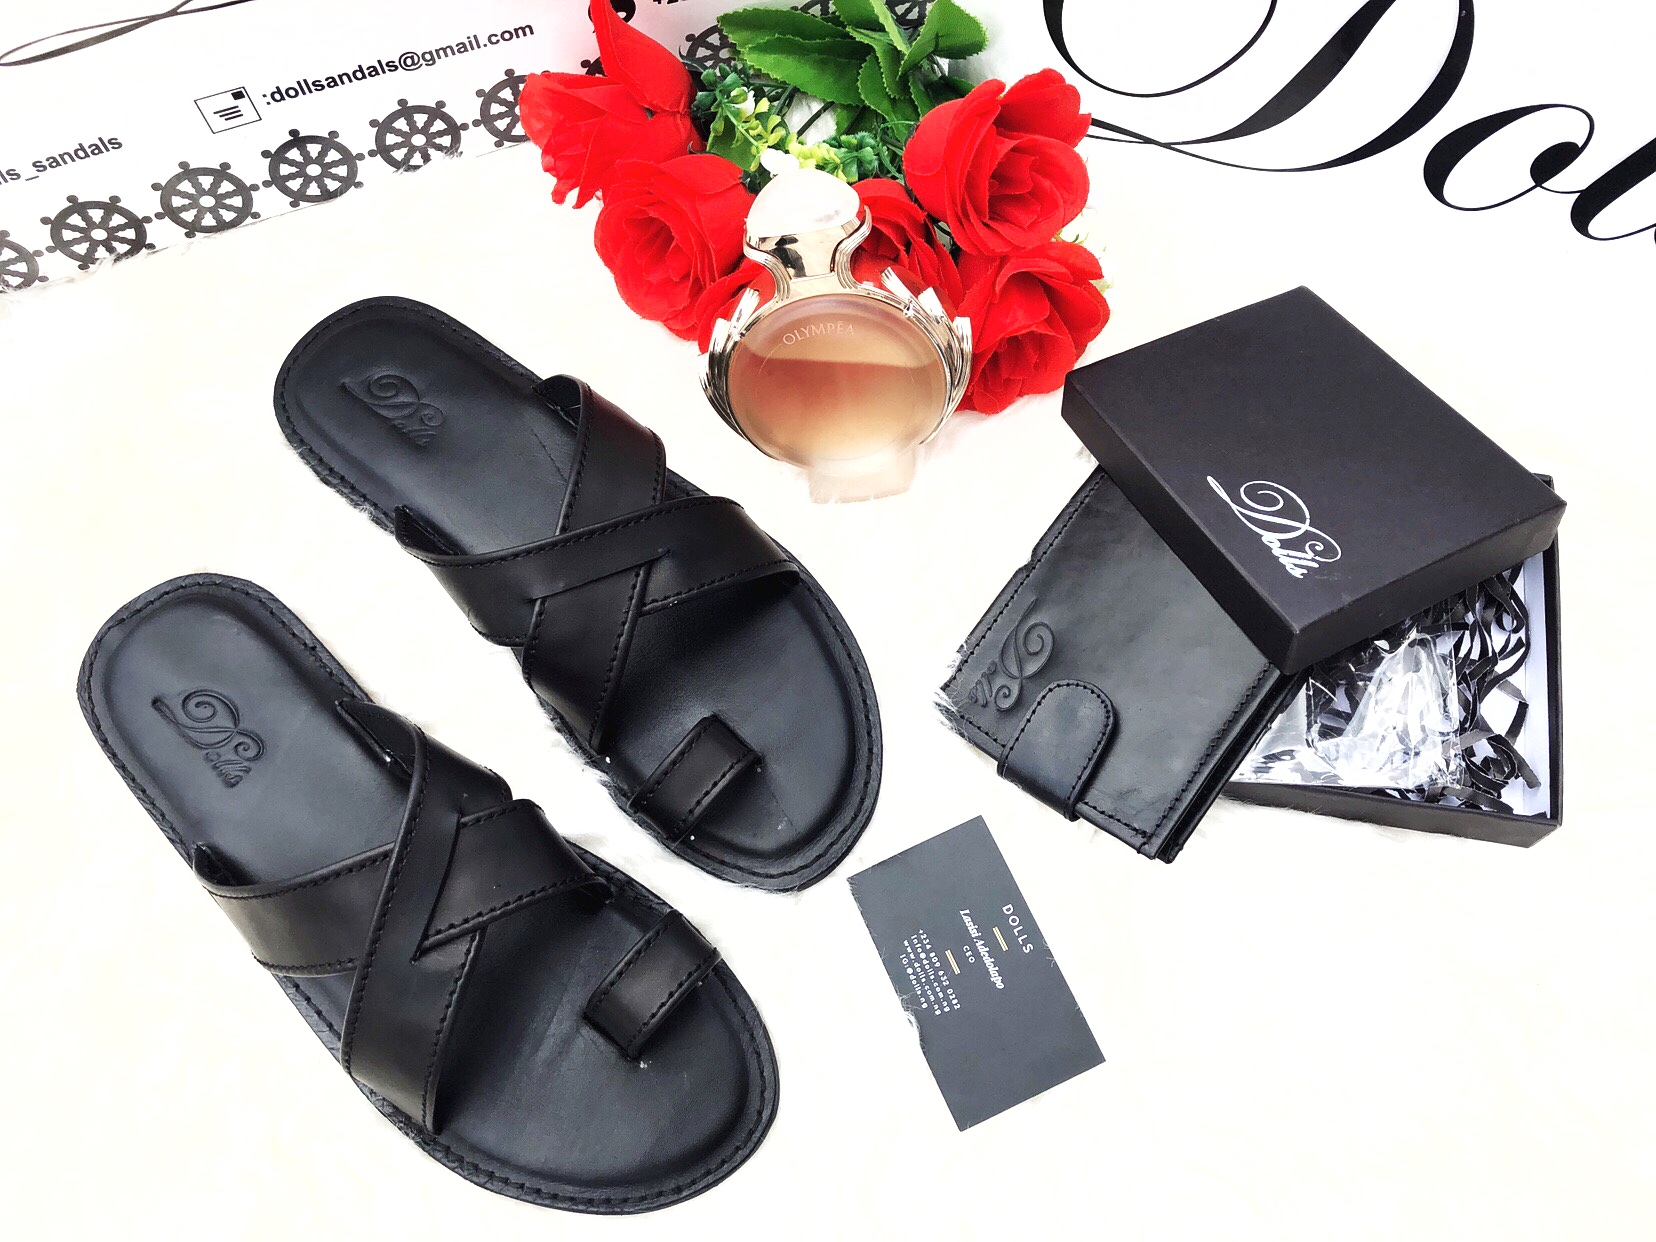 picture of leather sandals for men on sale by Dolls leather products